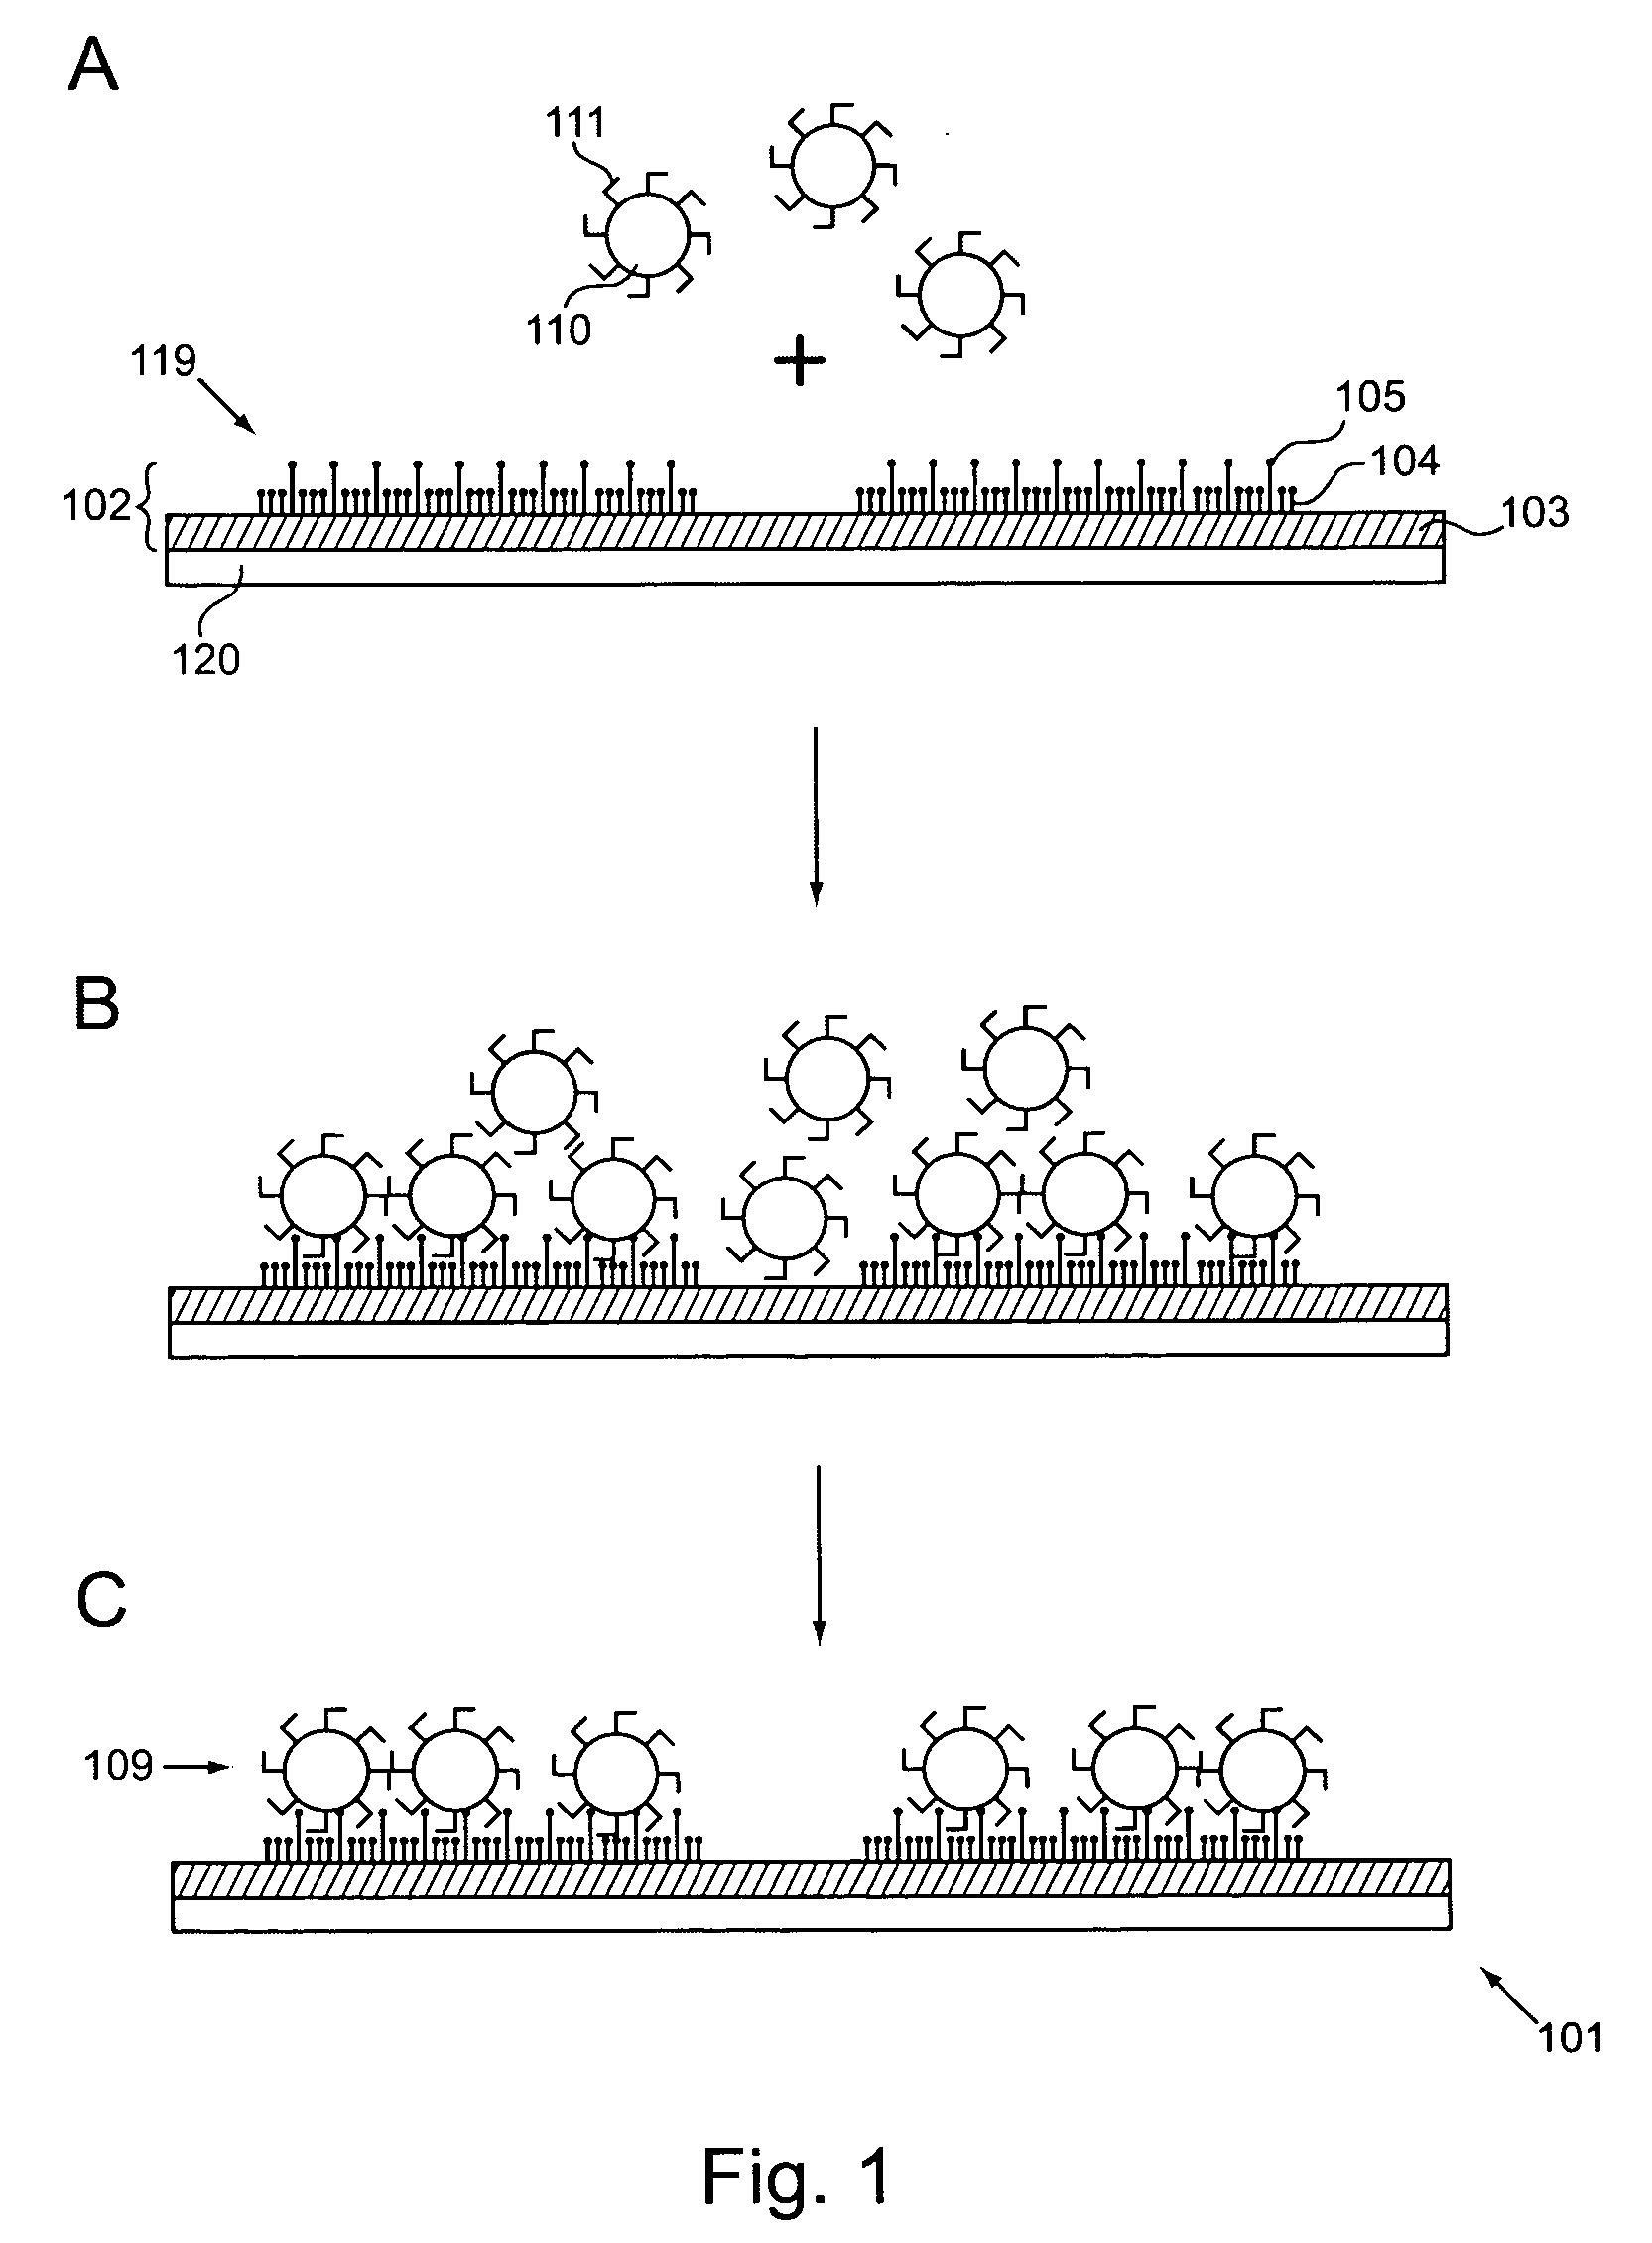 Methods and devices for forming nanostructure monolayers and devices including such monolayers